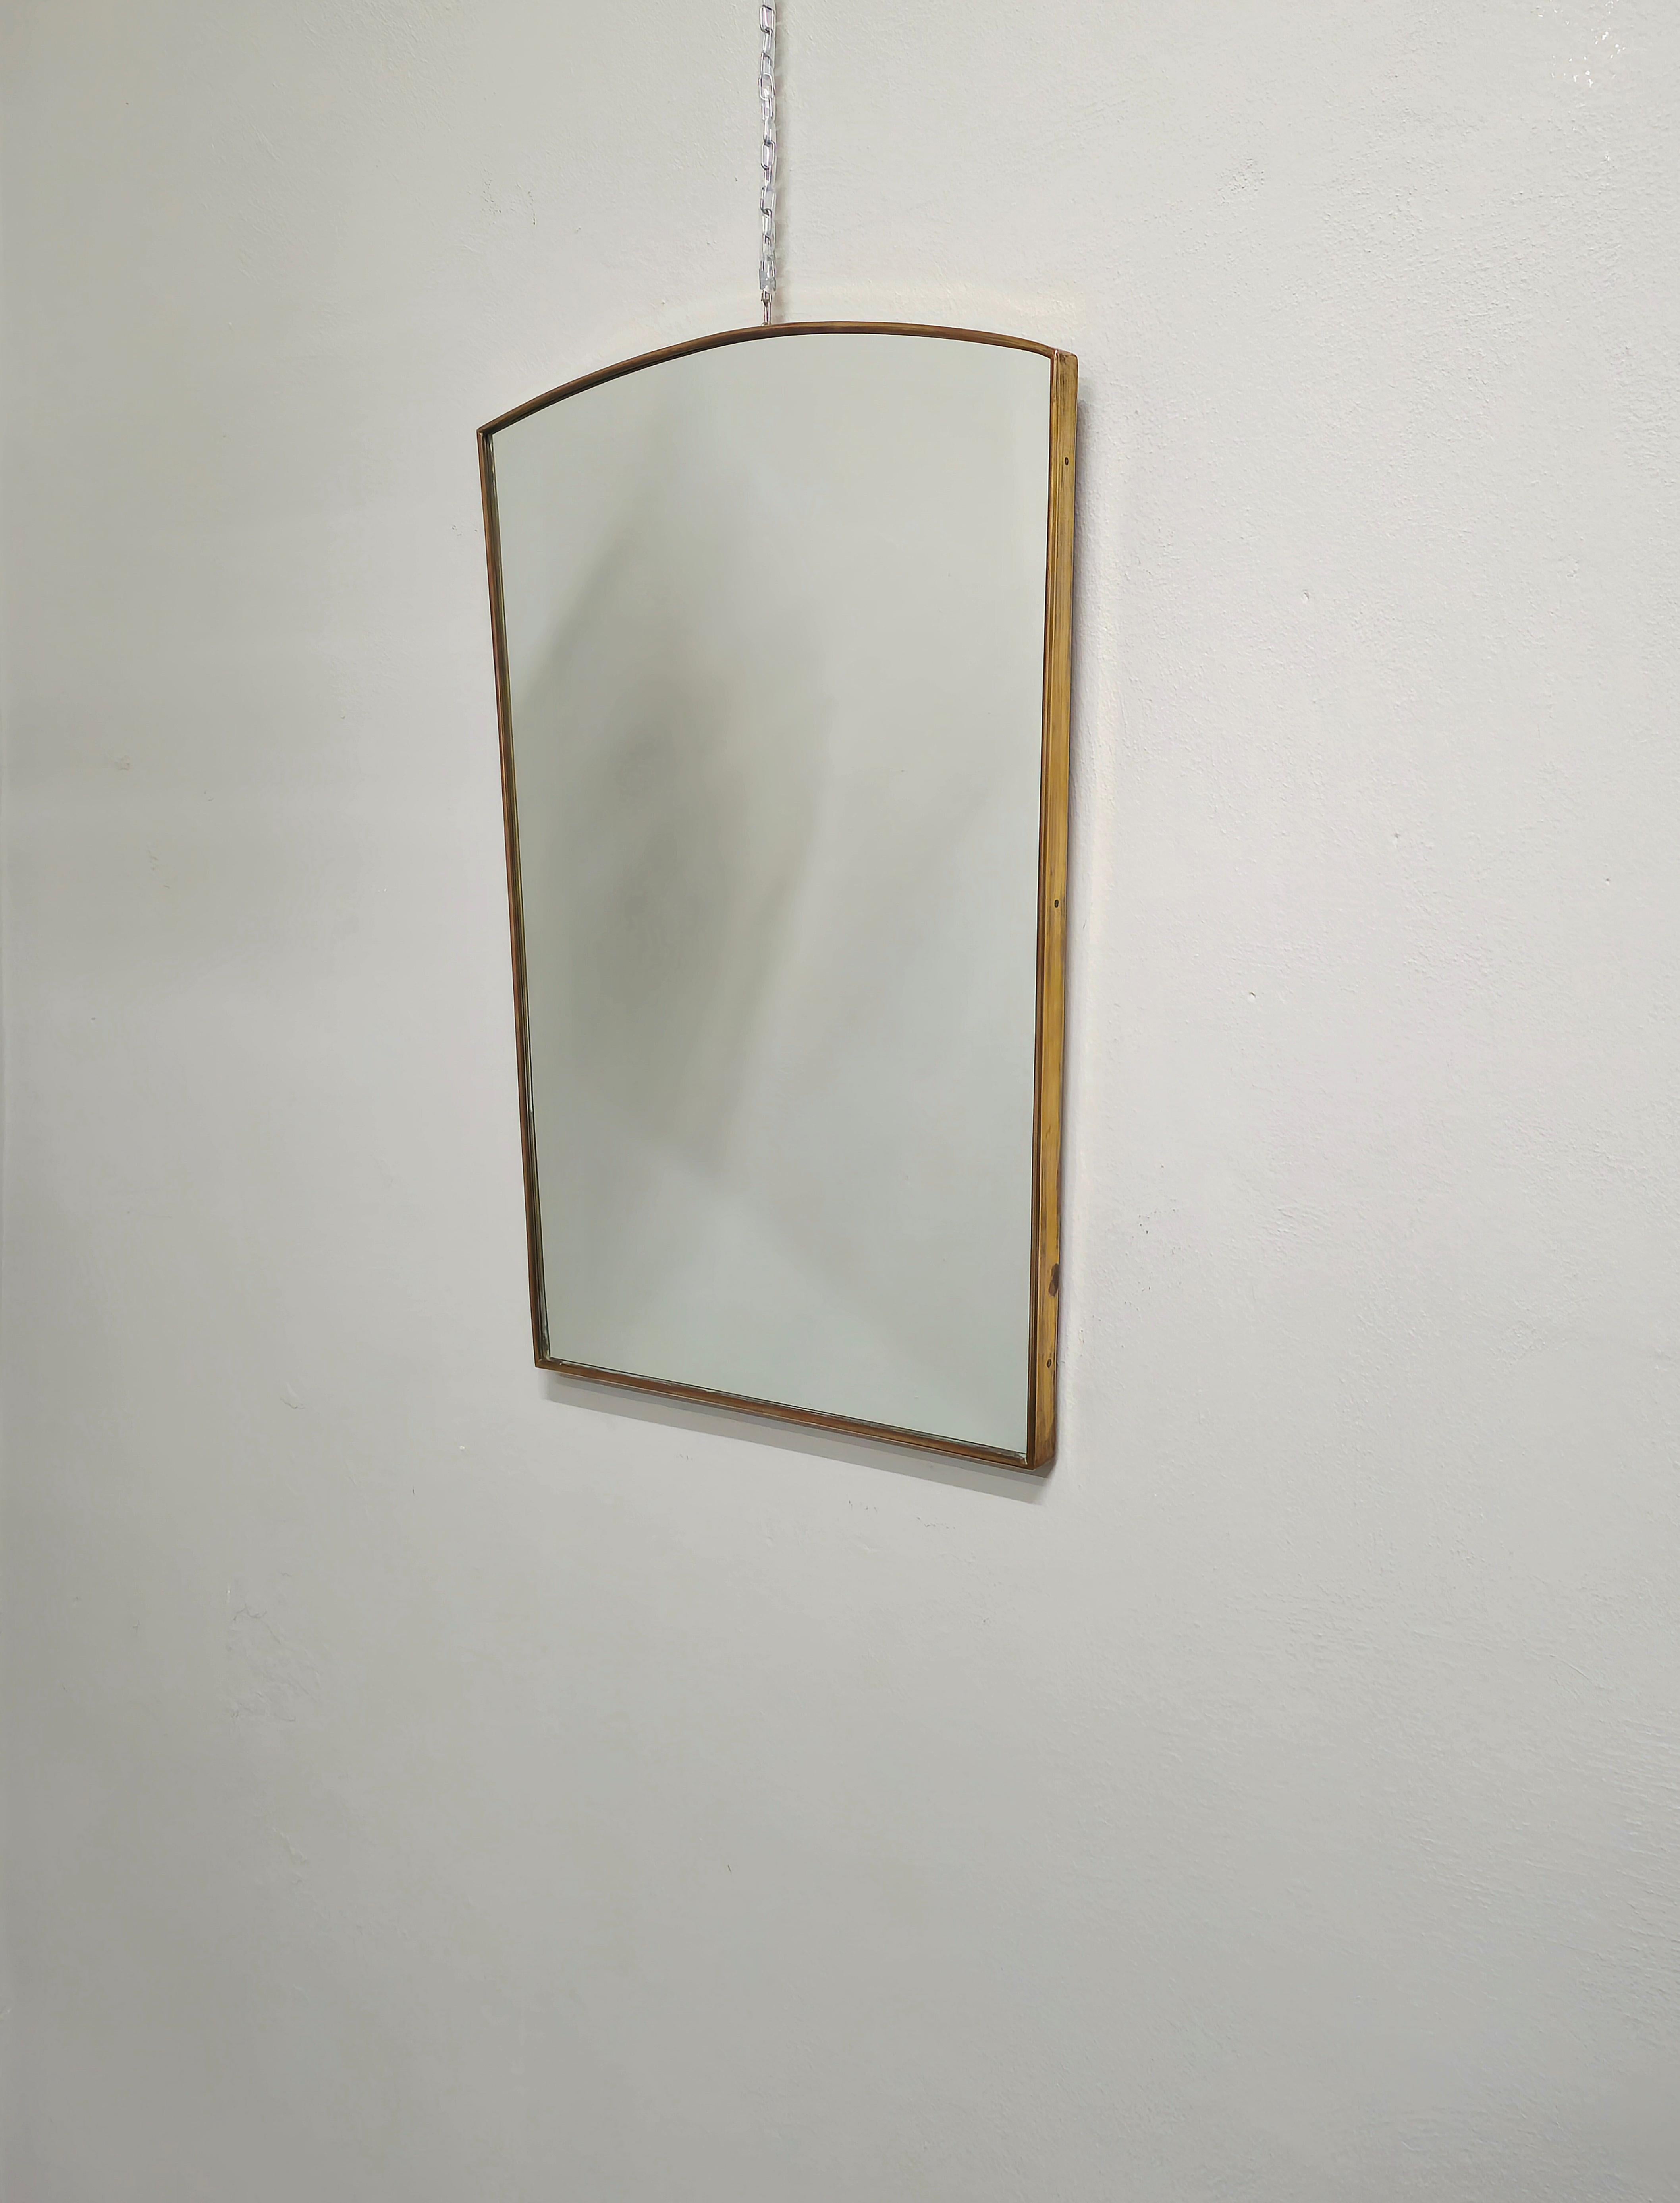 Wall Mirror Brass Midcentury Modern Italian Design 1950s 1960s In Good Condition For Sale In Palermo, IT